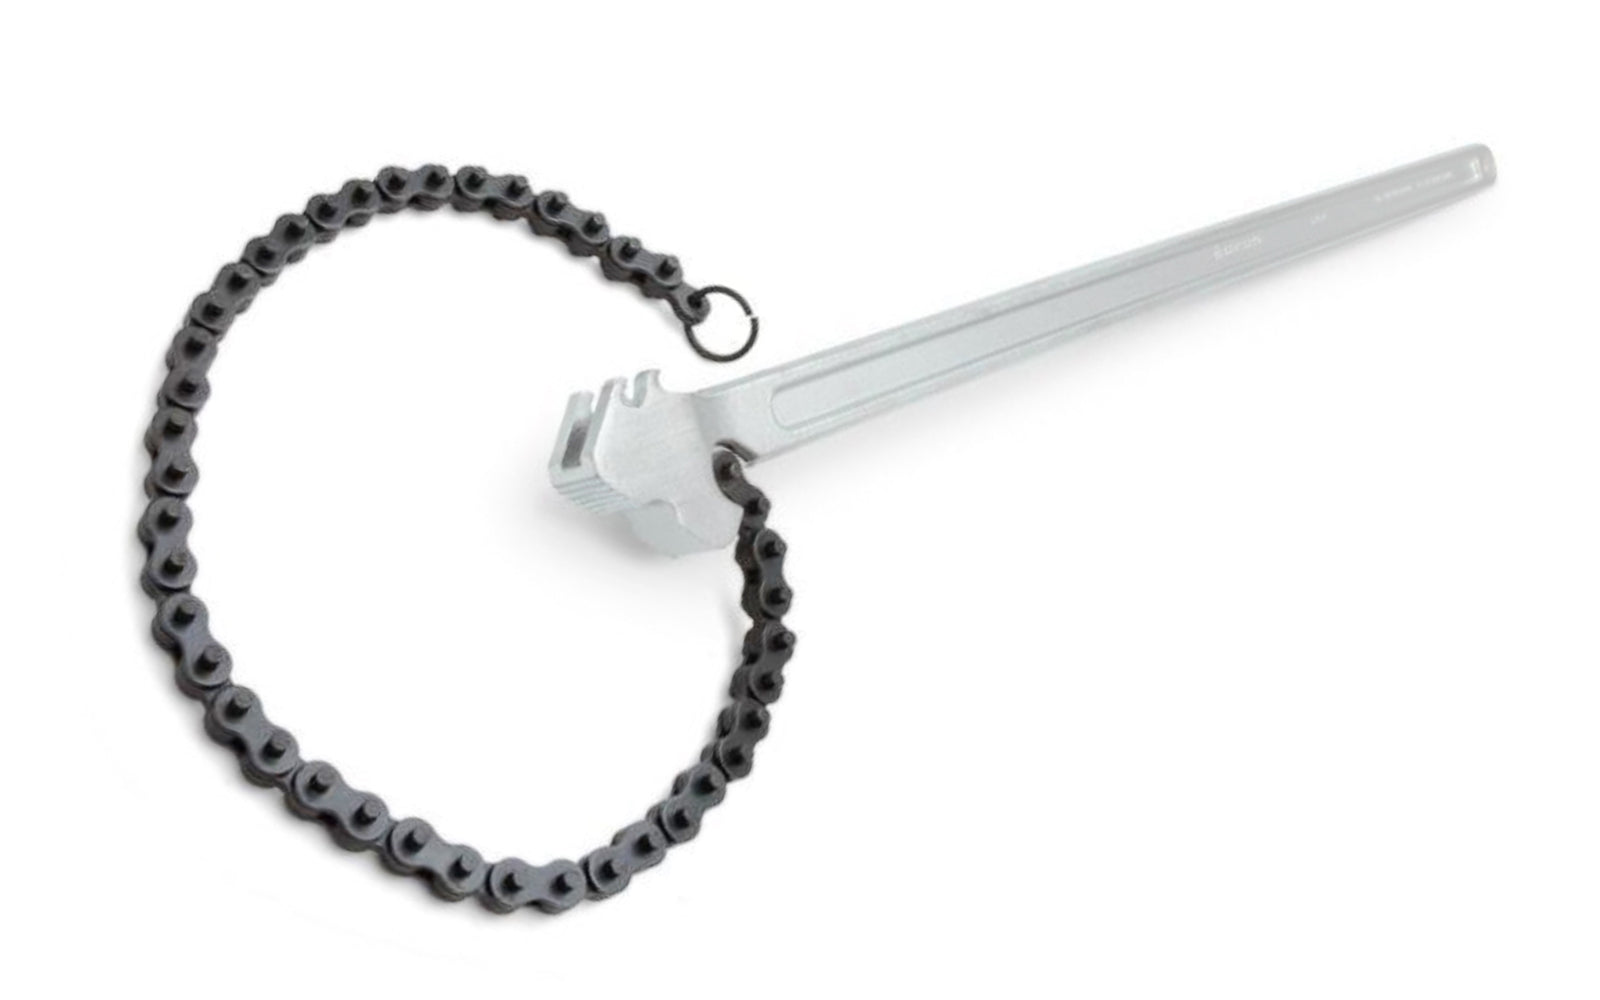 Crescent 24" Chain Wrench - CW24. Crescent Chain Wrenches are designed for confined areas that ordinary pipe wrenches can't reach. Double-action grip force allows usage in either direction for both tightening and loosening. The wrench features concave-cut teeth for improved gripping that can be easily sharpened if needed. Crescent Tool - Apex Tool Group.